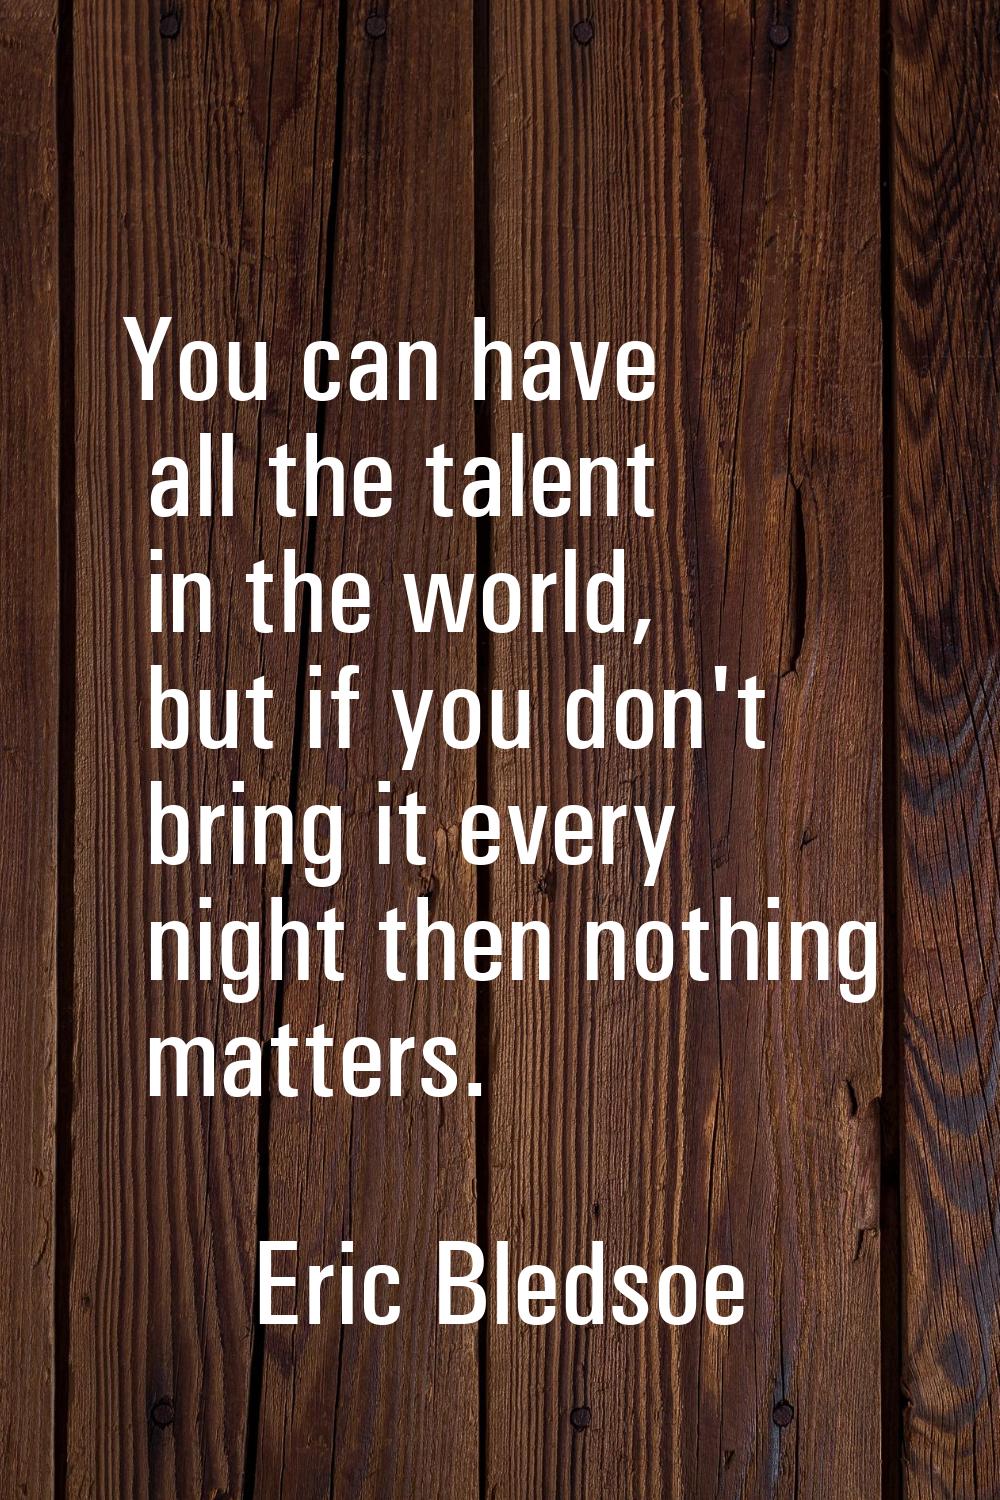 You can have all the talent in the world, but if you don't bring it every night then nothing matter